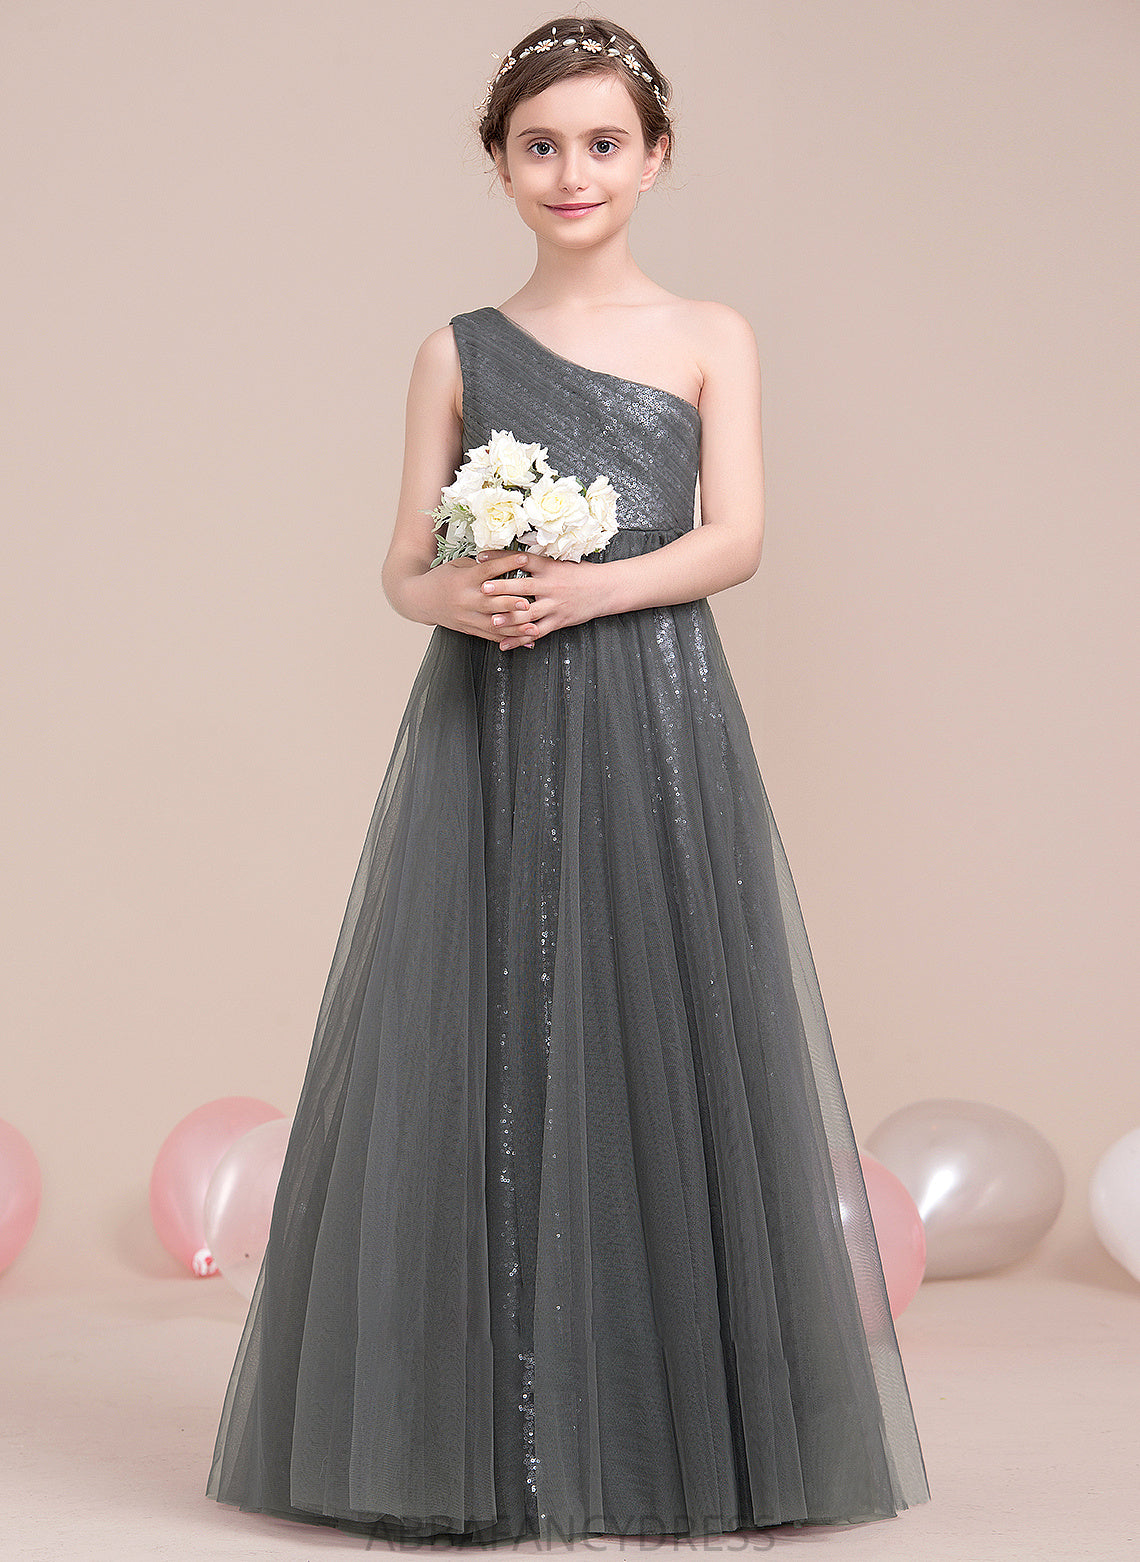 Ruffle Laila Tulle One-Shoulder Floor-Length A-Line Junior Bridesmaid Dresses With Sequined